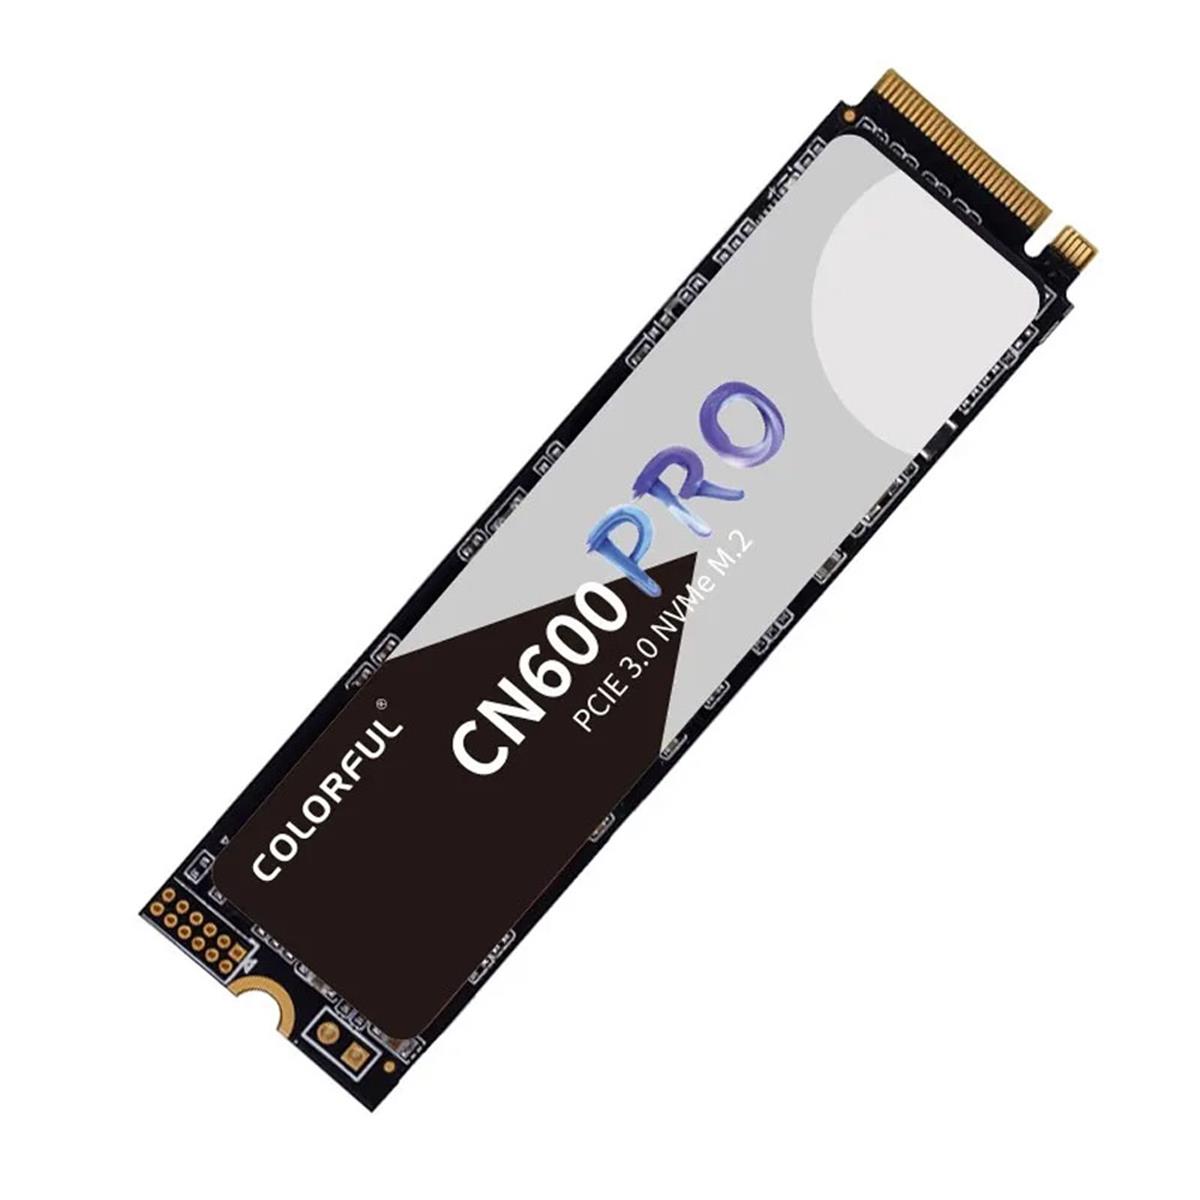 SSD 256 GB Colorful CN600 M.2 PCIe NVMe 3.0 PRO